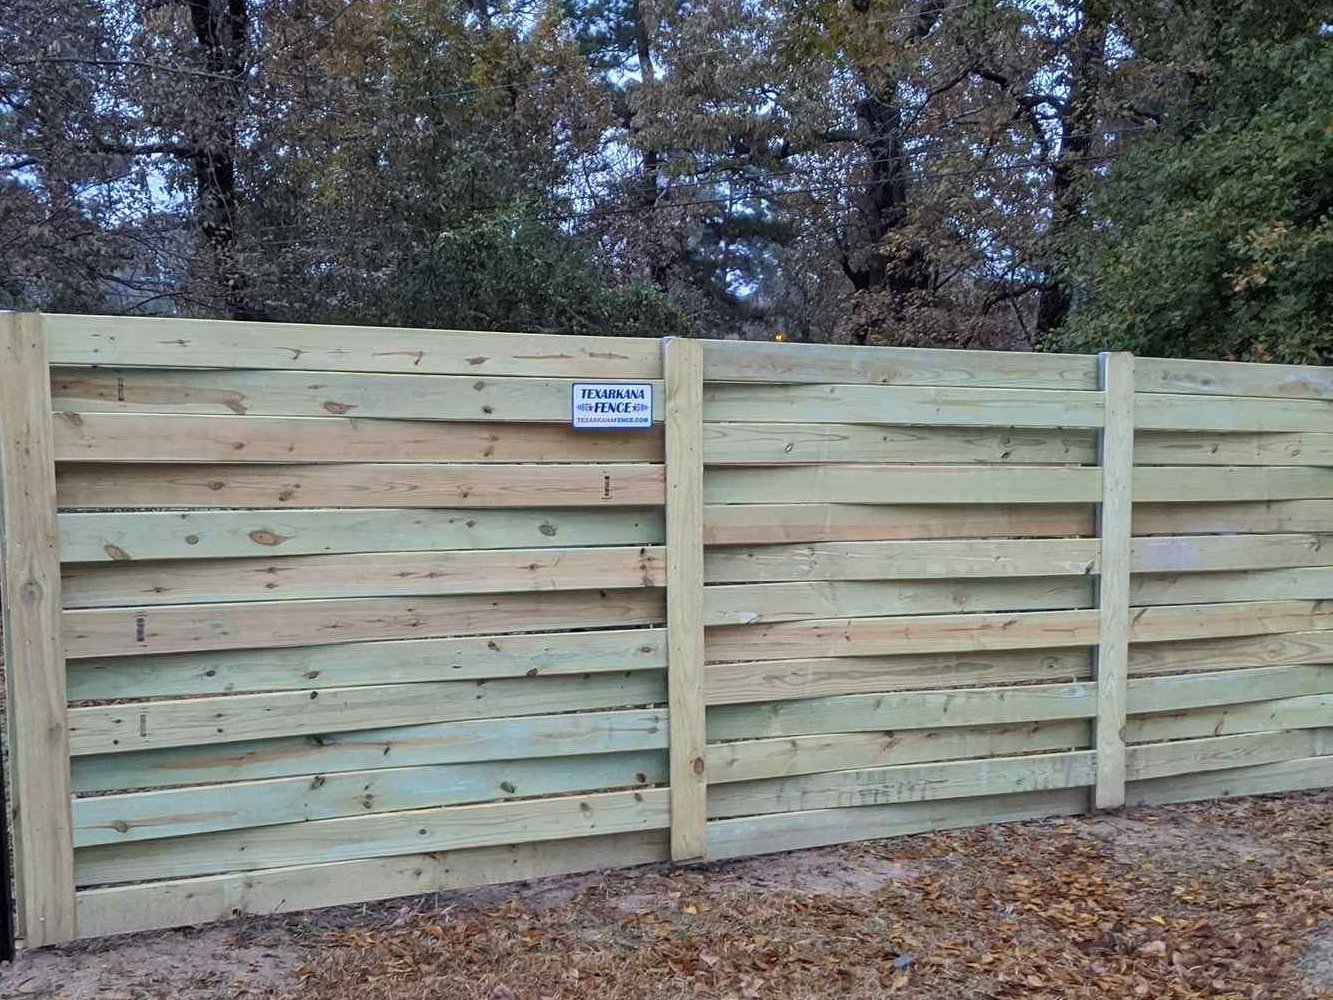 Leary TX horizontal style wood fence